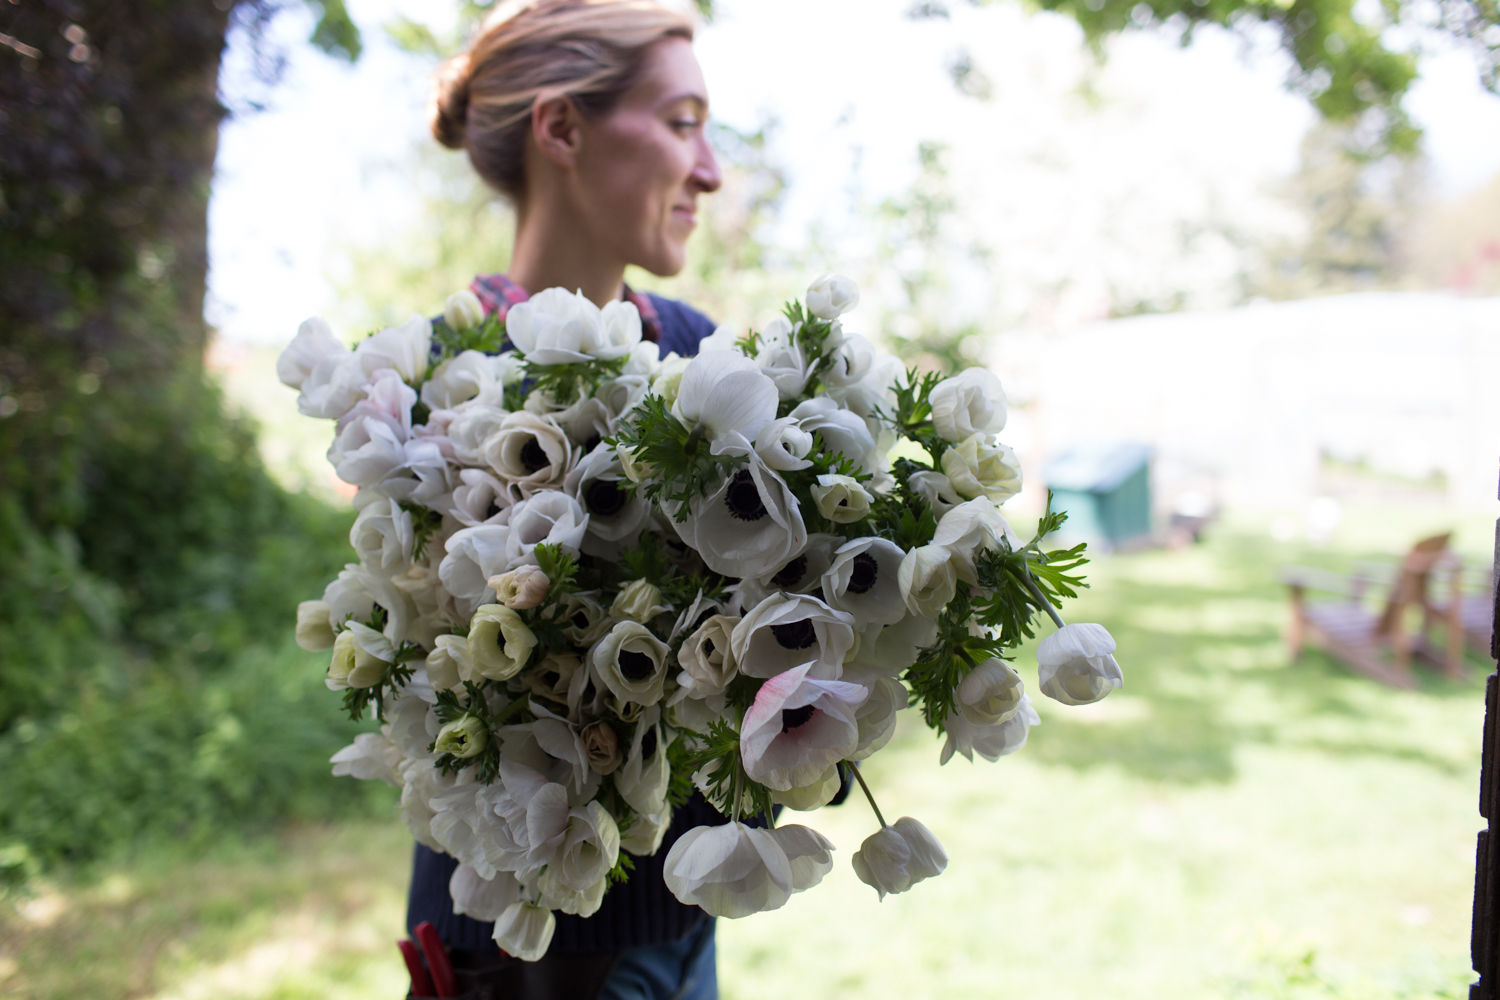 Erin Benzakein holding a large bouquet of black and white anemones